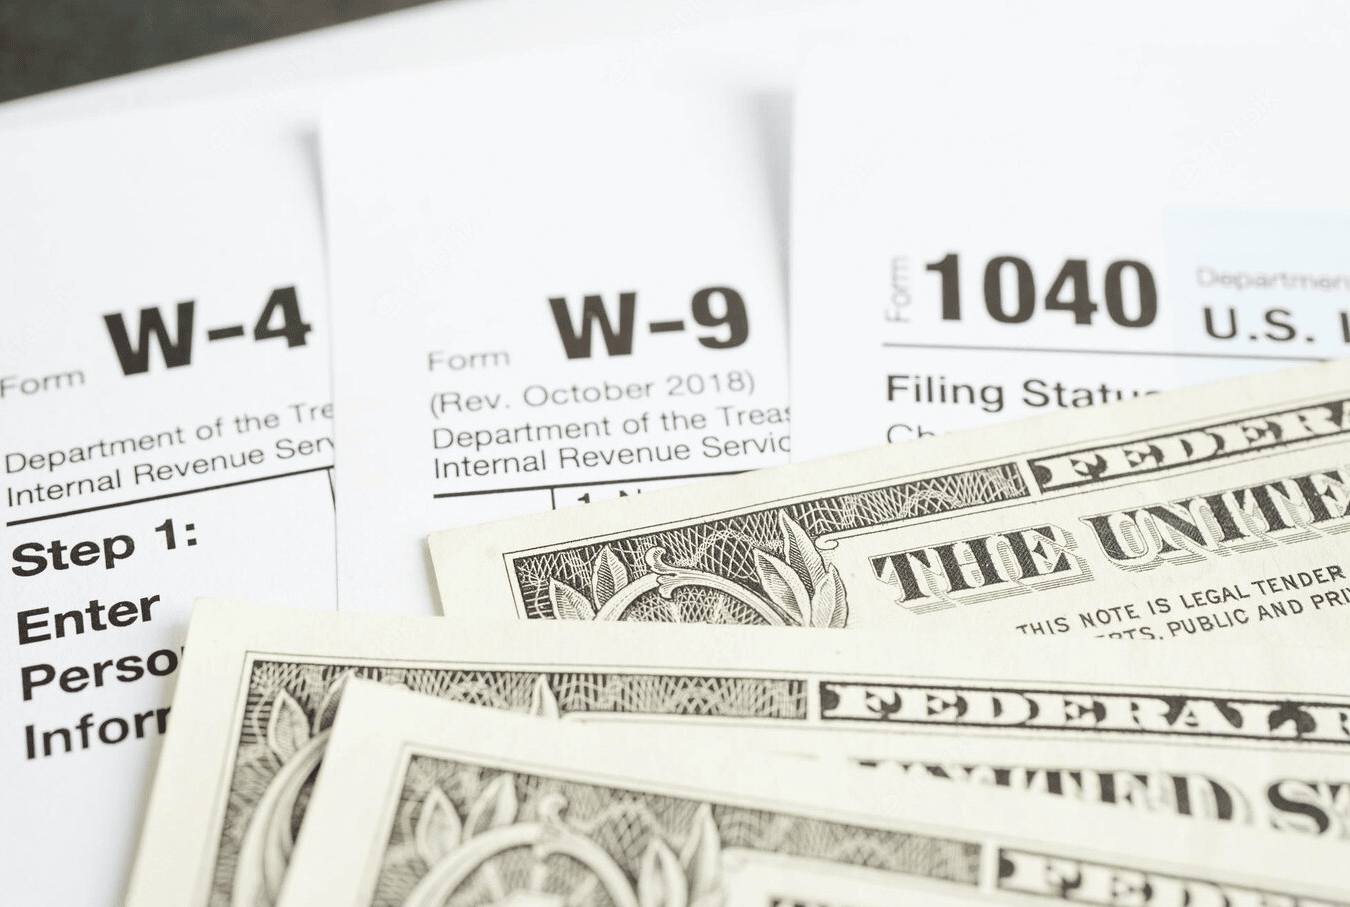 IRs forms and dollar bills